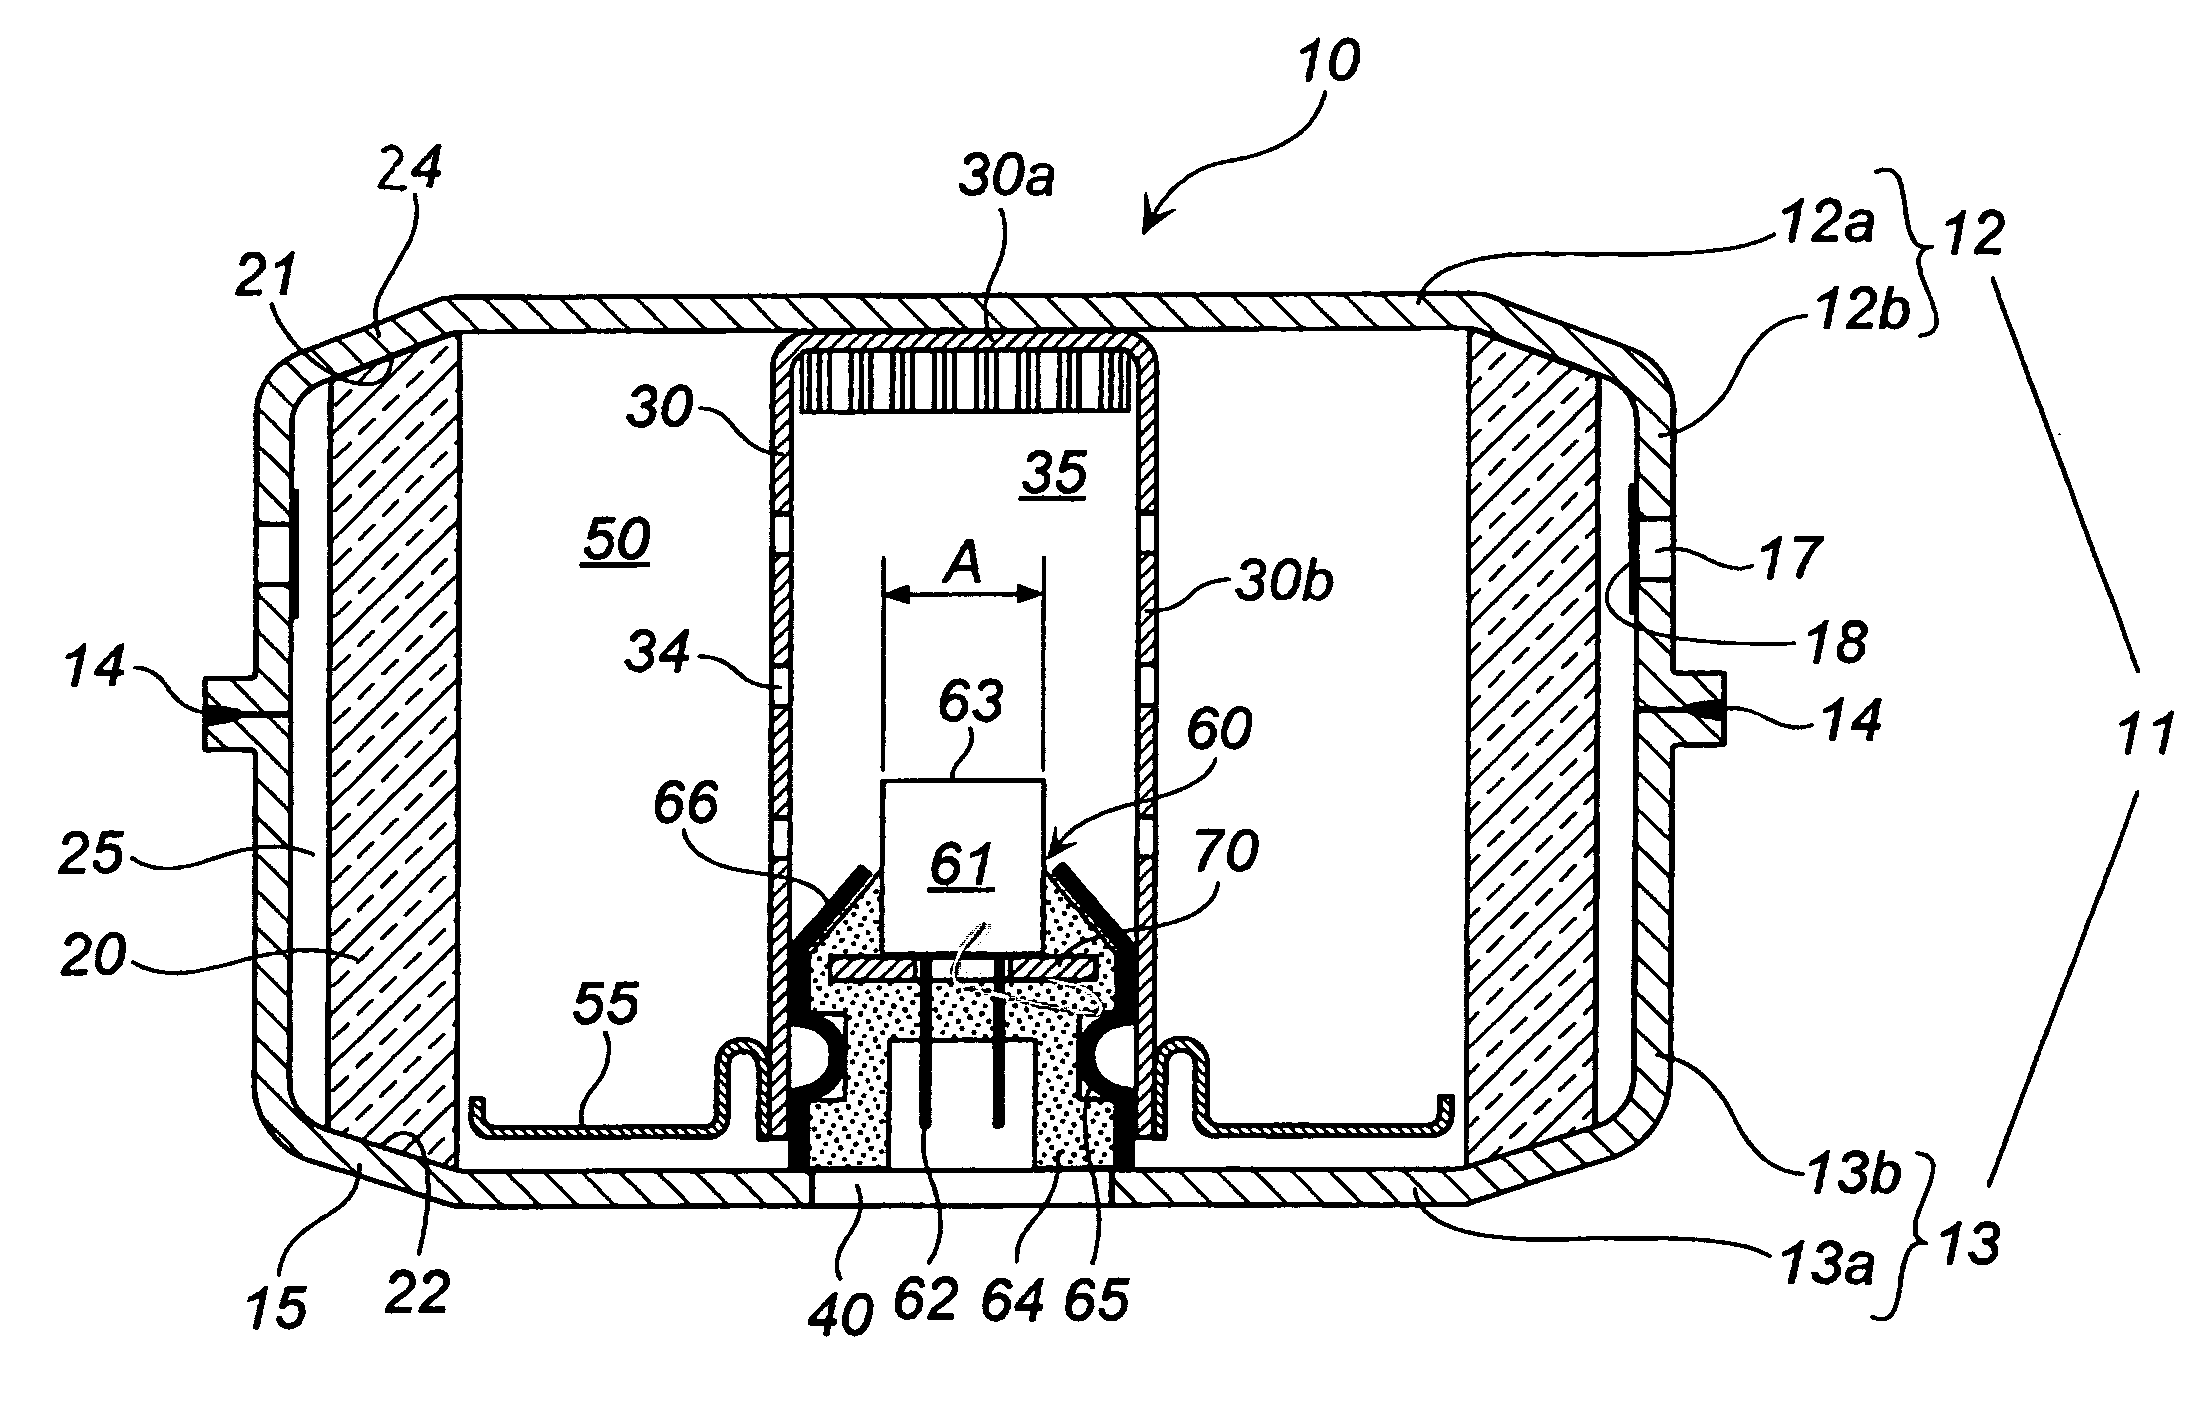 Apparatus including igniter assembly